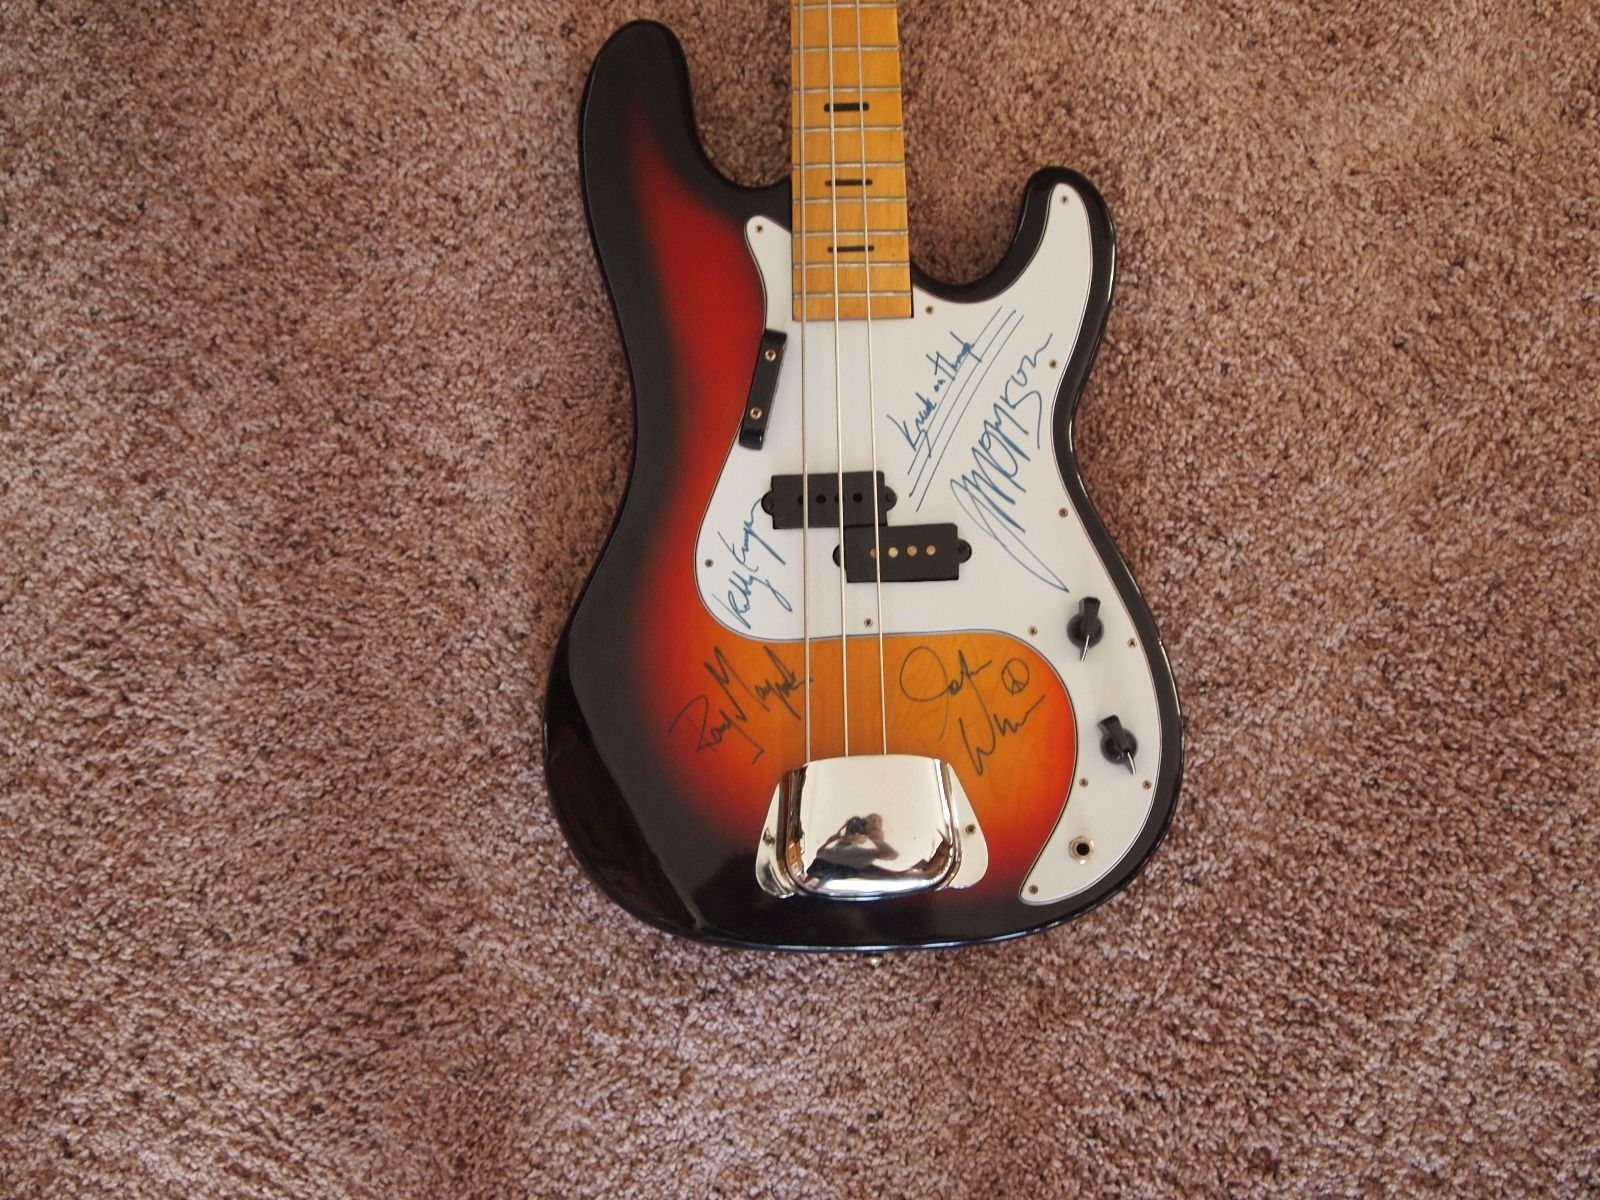 Signatures of this guitar to compare to Autographs Network